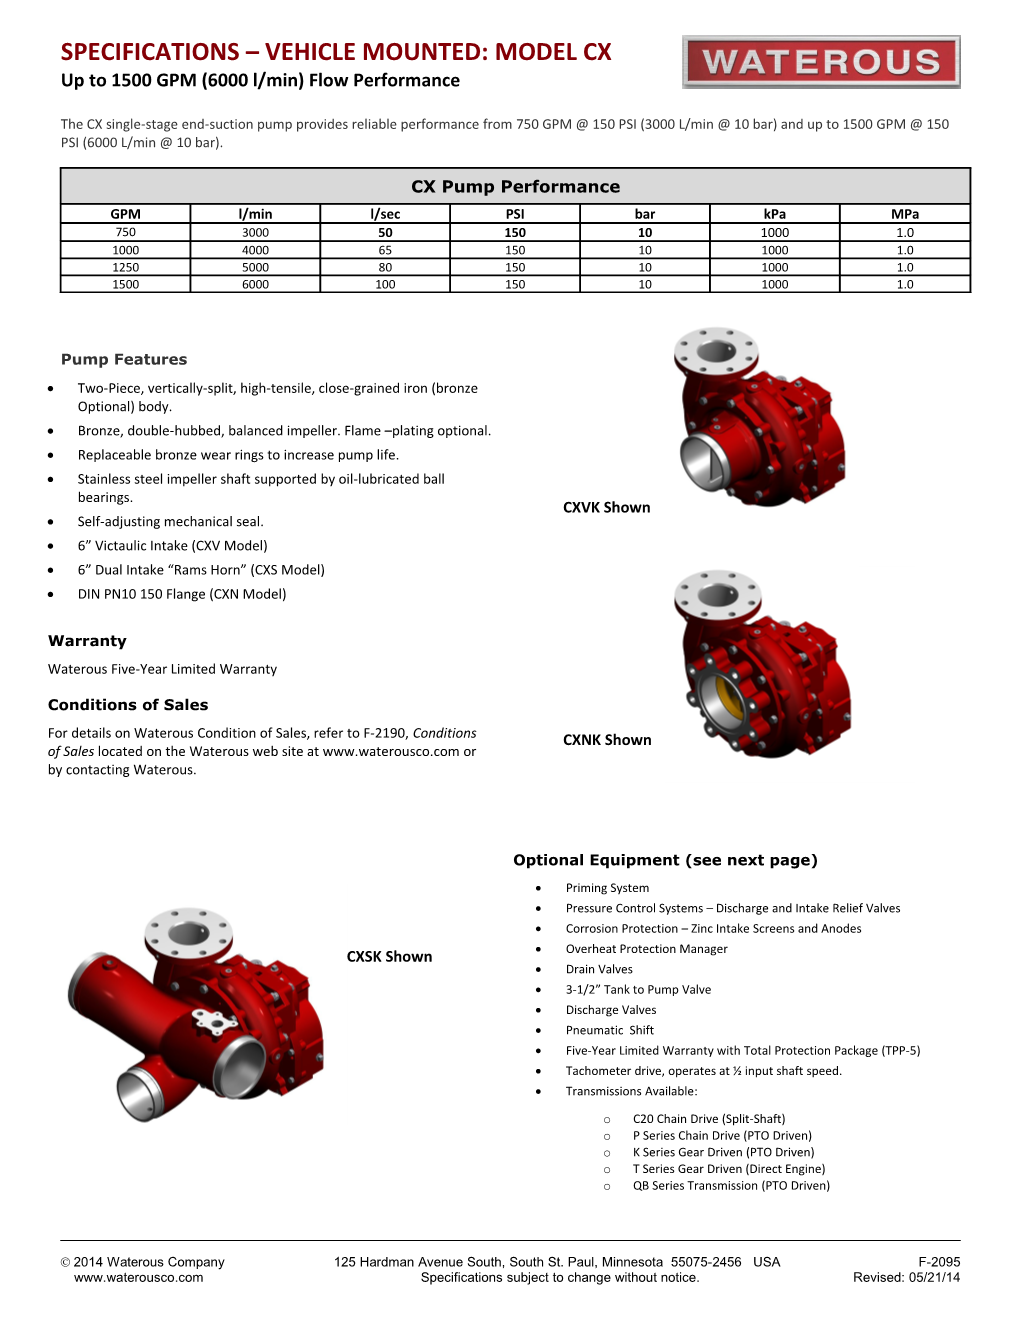 SPECIFICATIONS Vehicle Mounted: Model Cx up to 1500 GPM (6000 L/Min) Flow Performance